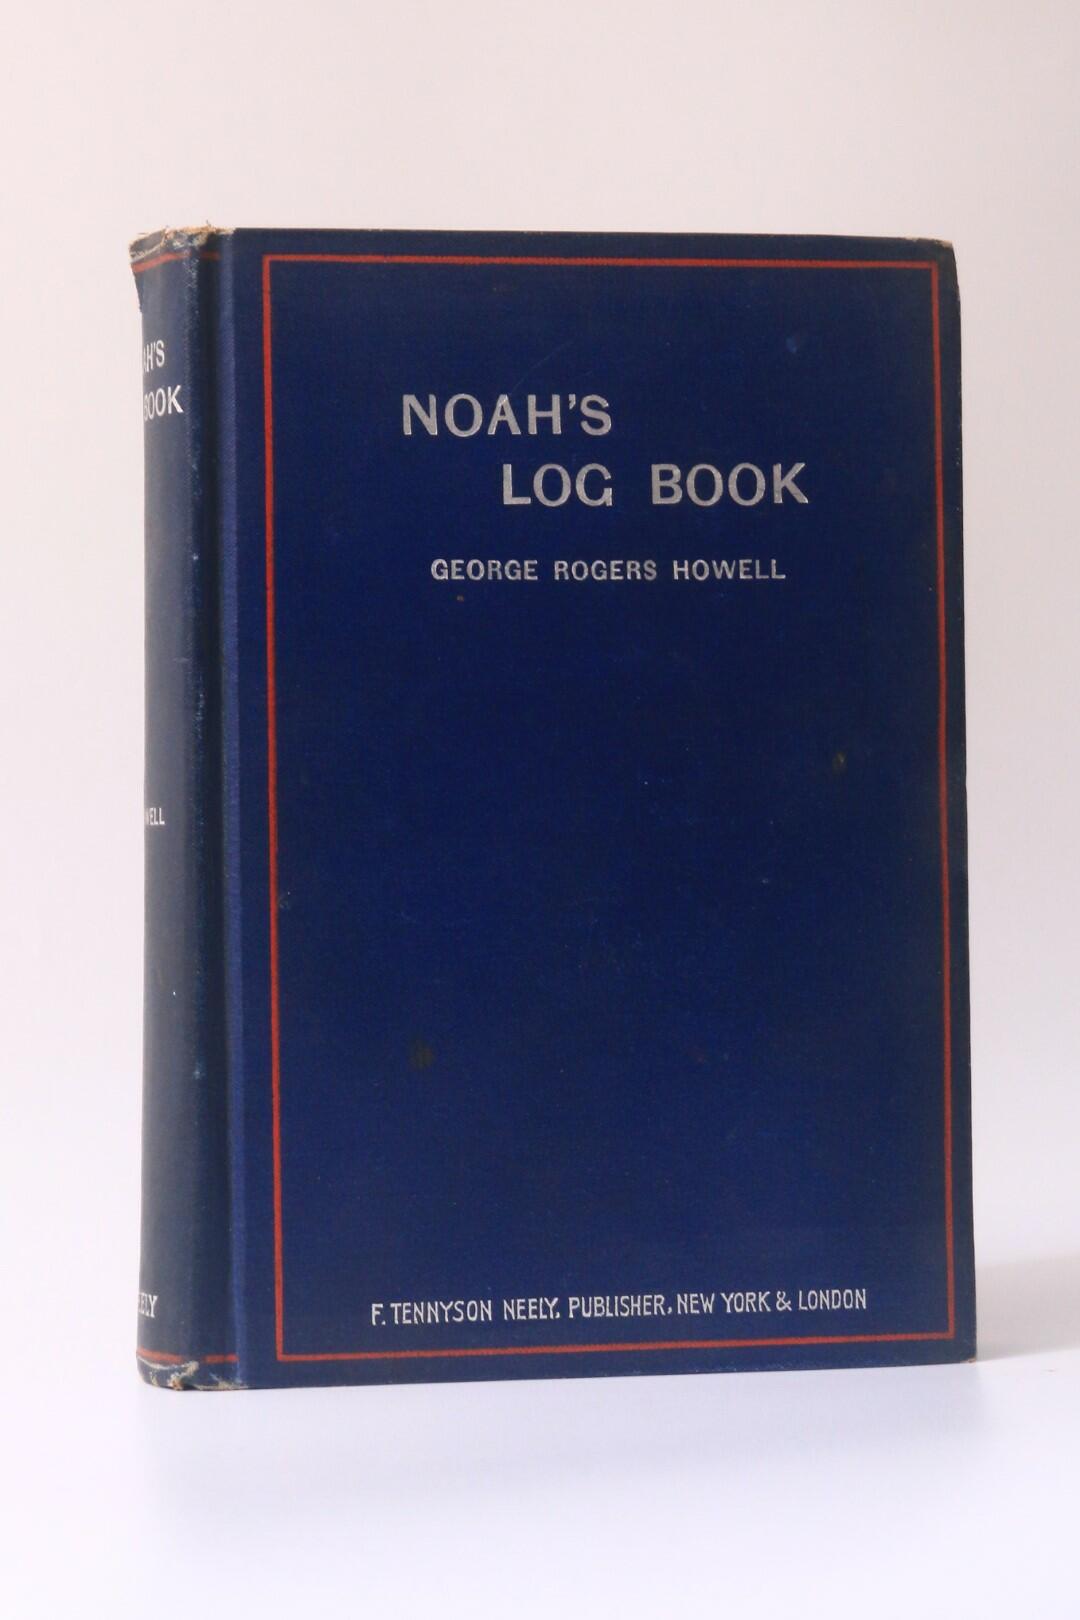 George Rogers Howell - Noah's Log Book - F. Tennyson Neely, 1893, First Edition.